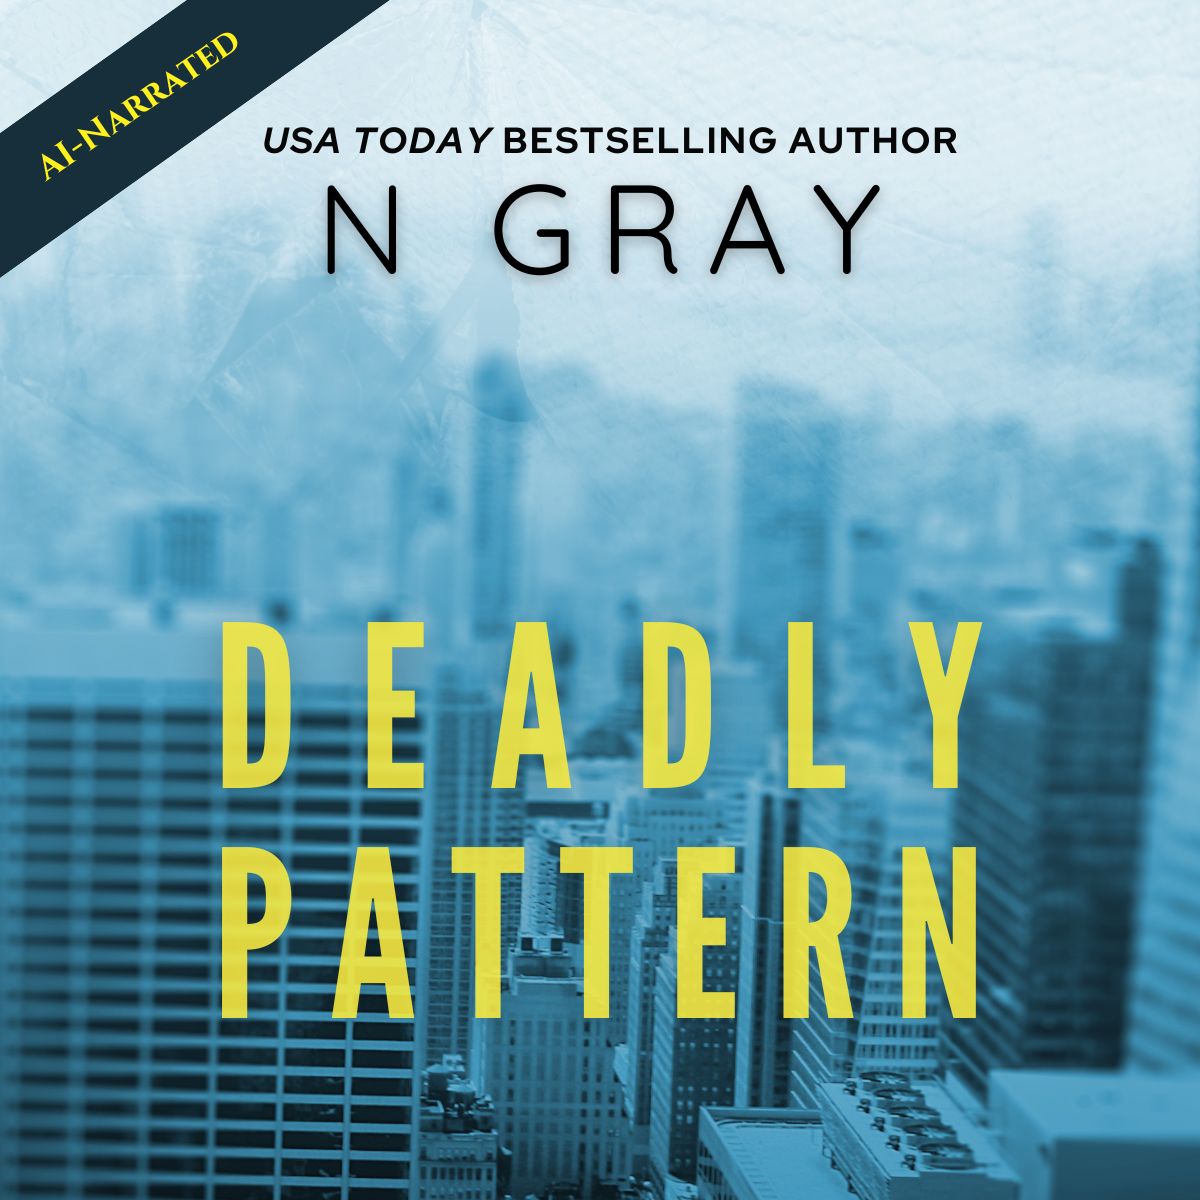 N Gray's Deadly Pattern audiobook